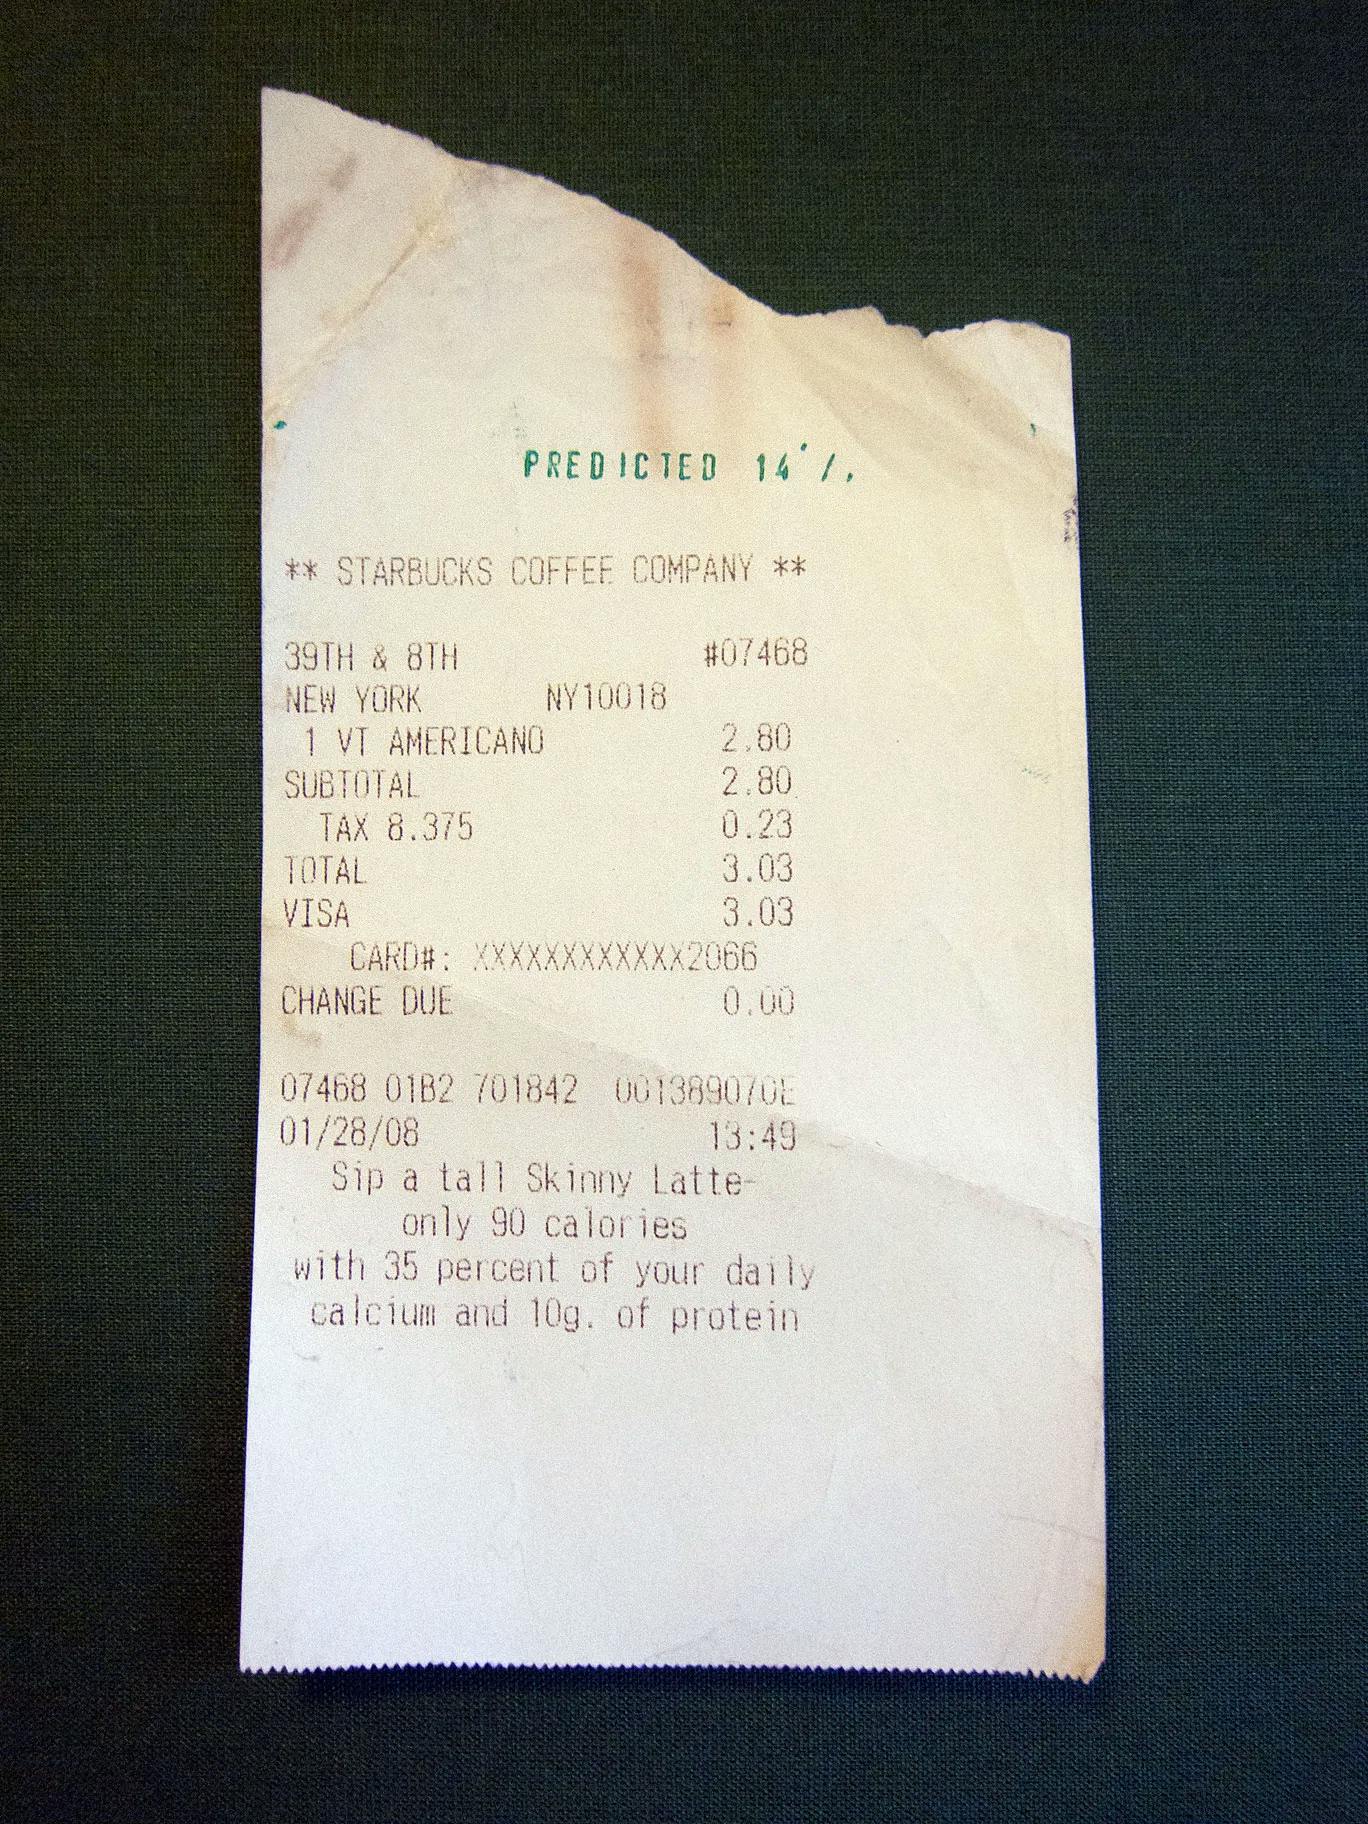 My Pocket - Receipt predicted 12%. Exhibition view, Neuberger Museum of Art, New York, 2009.